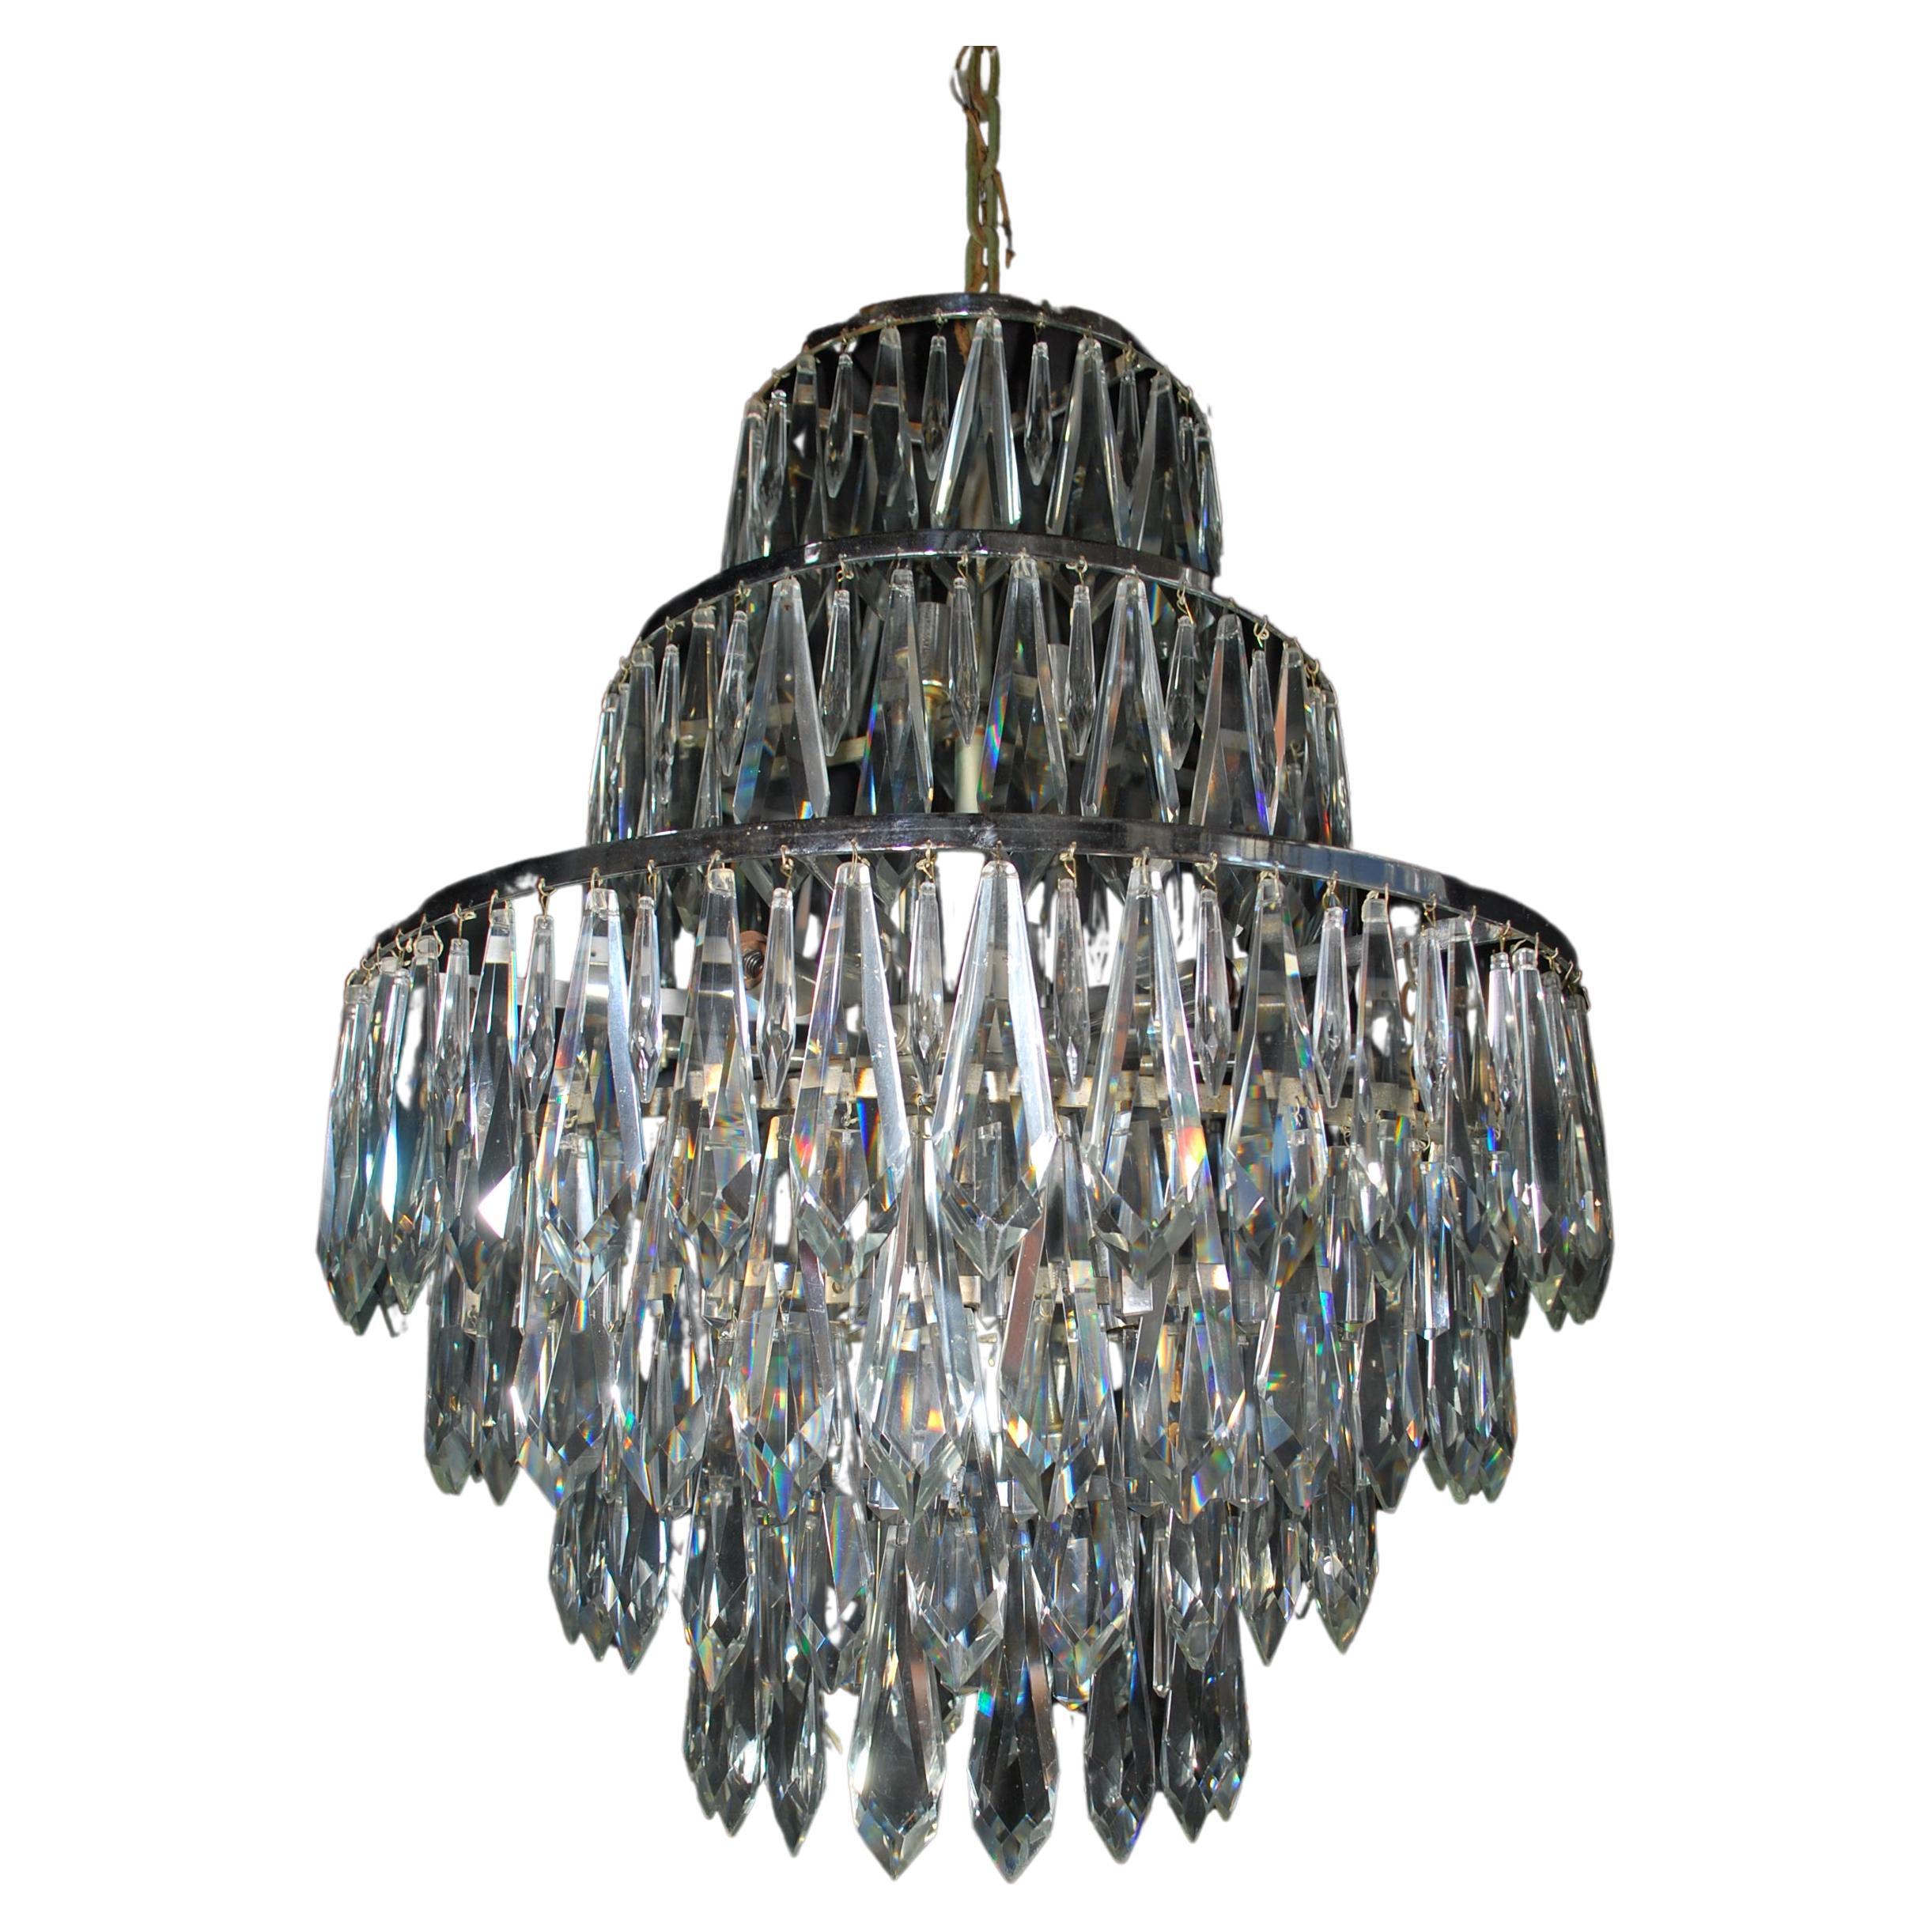 Rare 1960's Crystal Chandelier For Sale